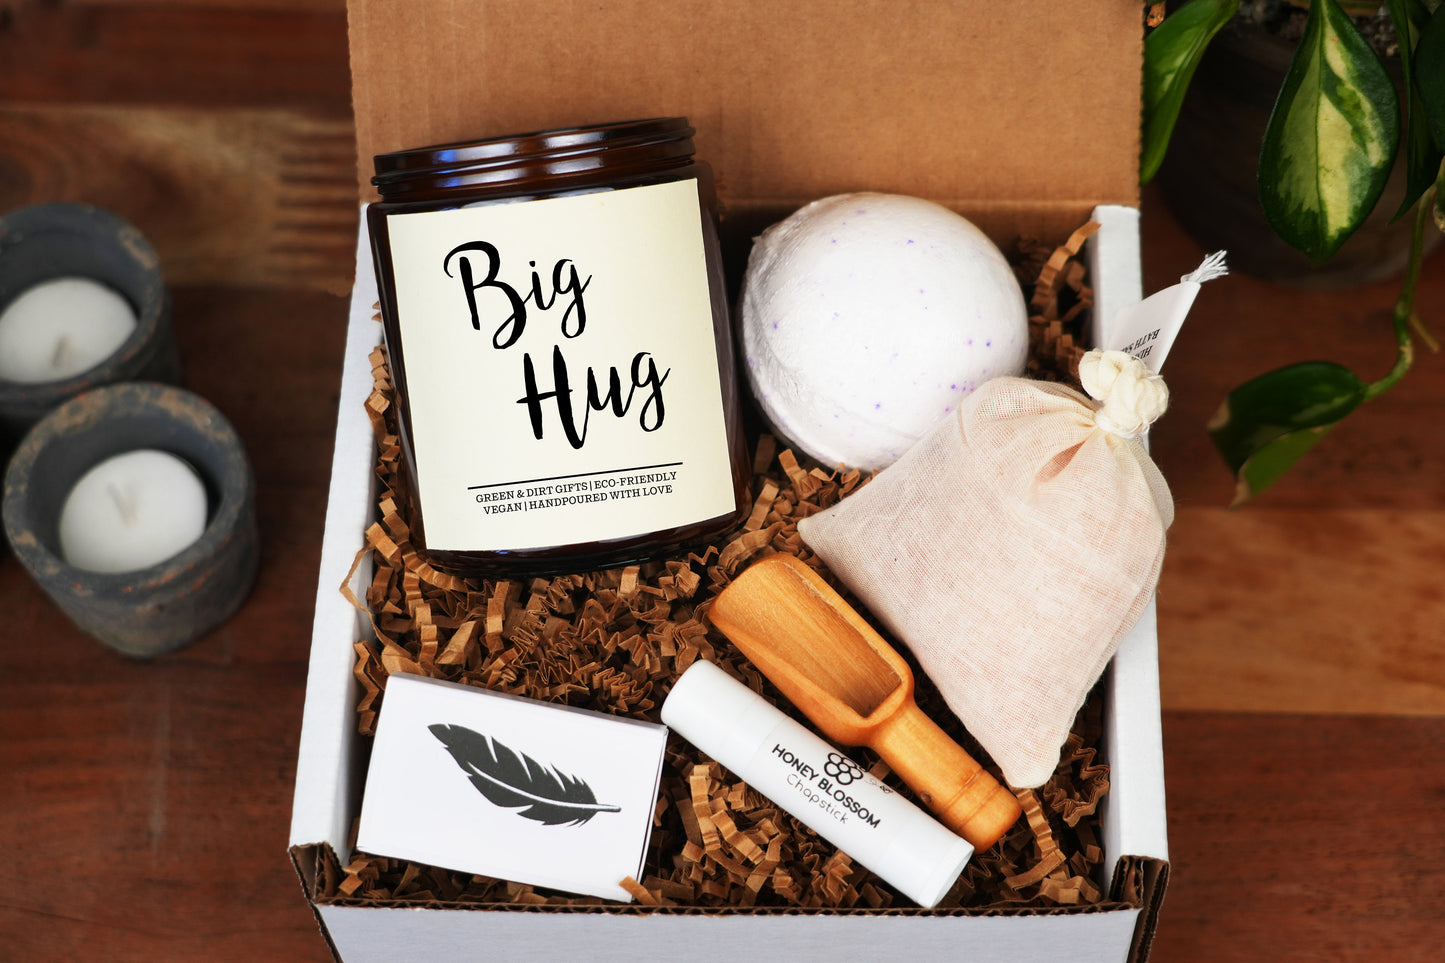 Big Hug Thank you gift box -9oz Candle -Self Care Gift Box, Care Package For Her, Gift Baskets for Women, New Mom Gift Basket, Get Well Soon